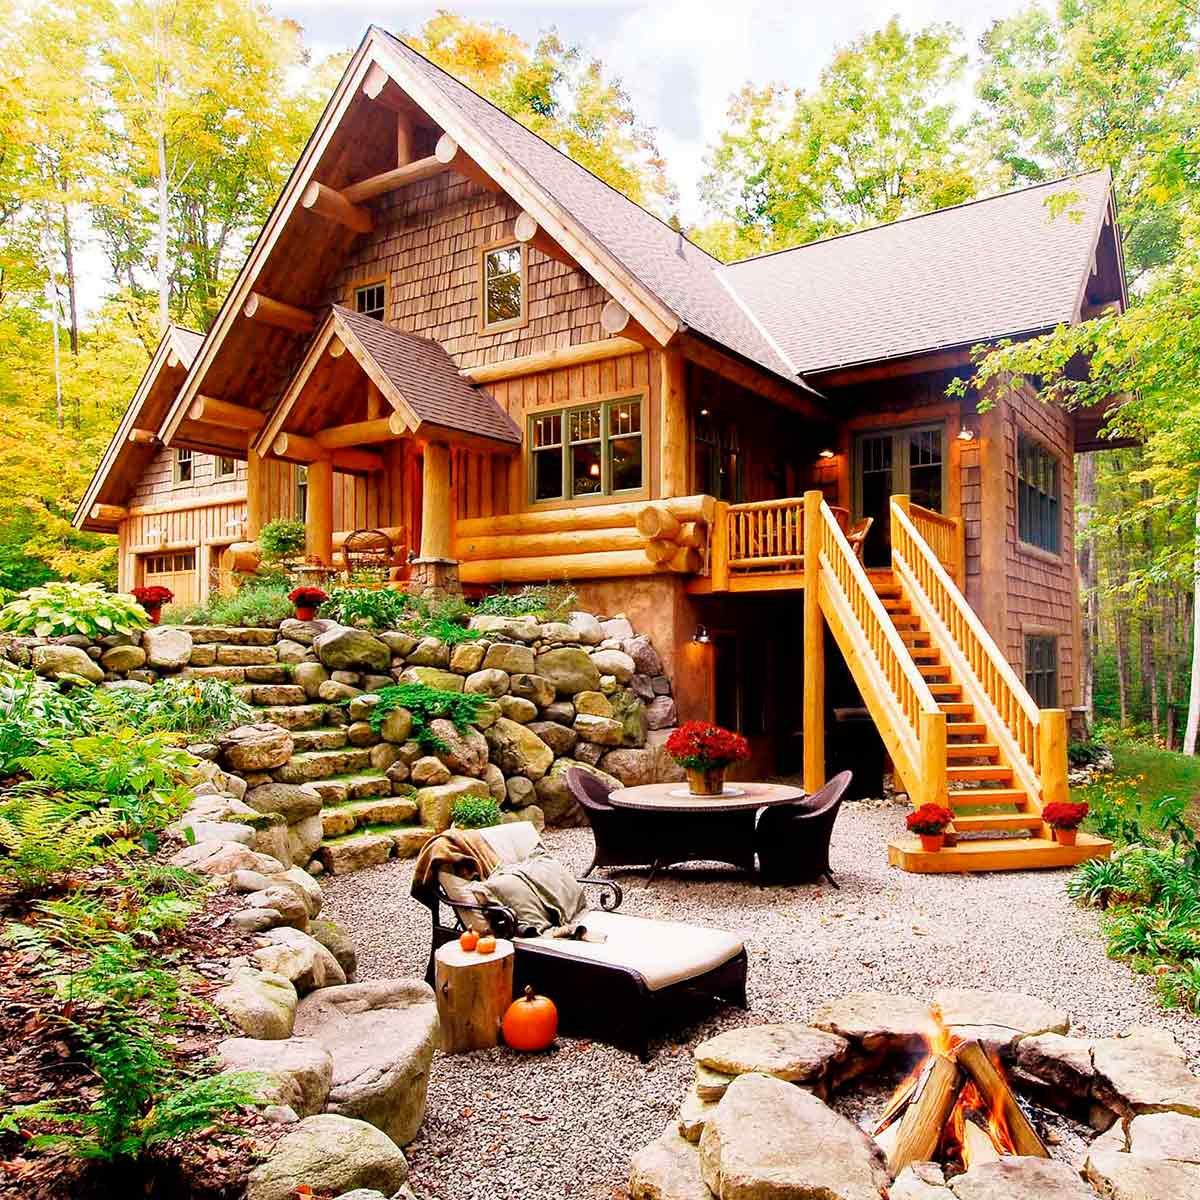 13 Amazing Cabins You Have to See to Believe